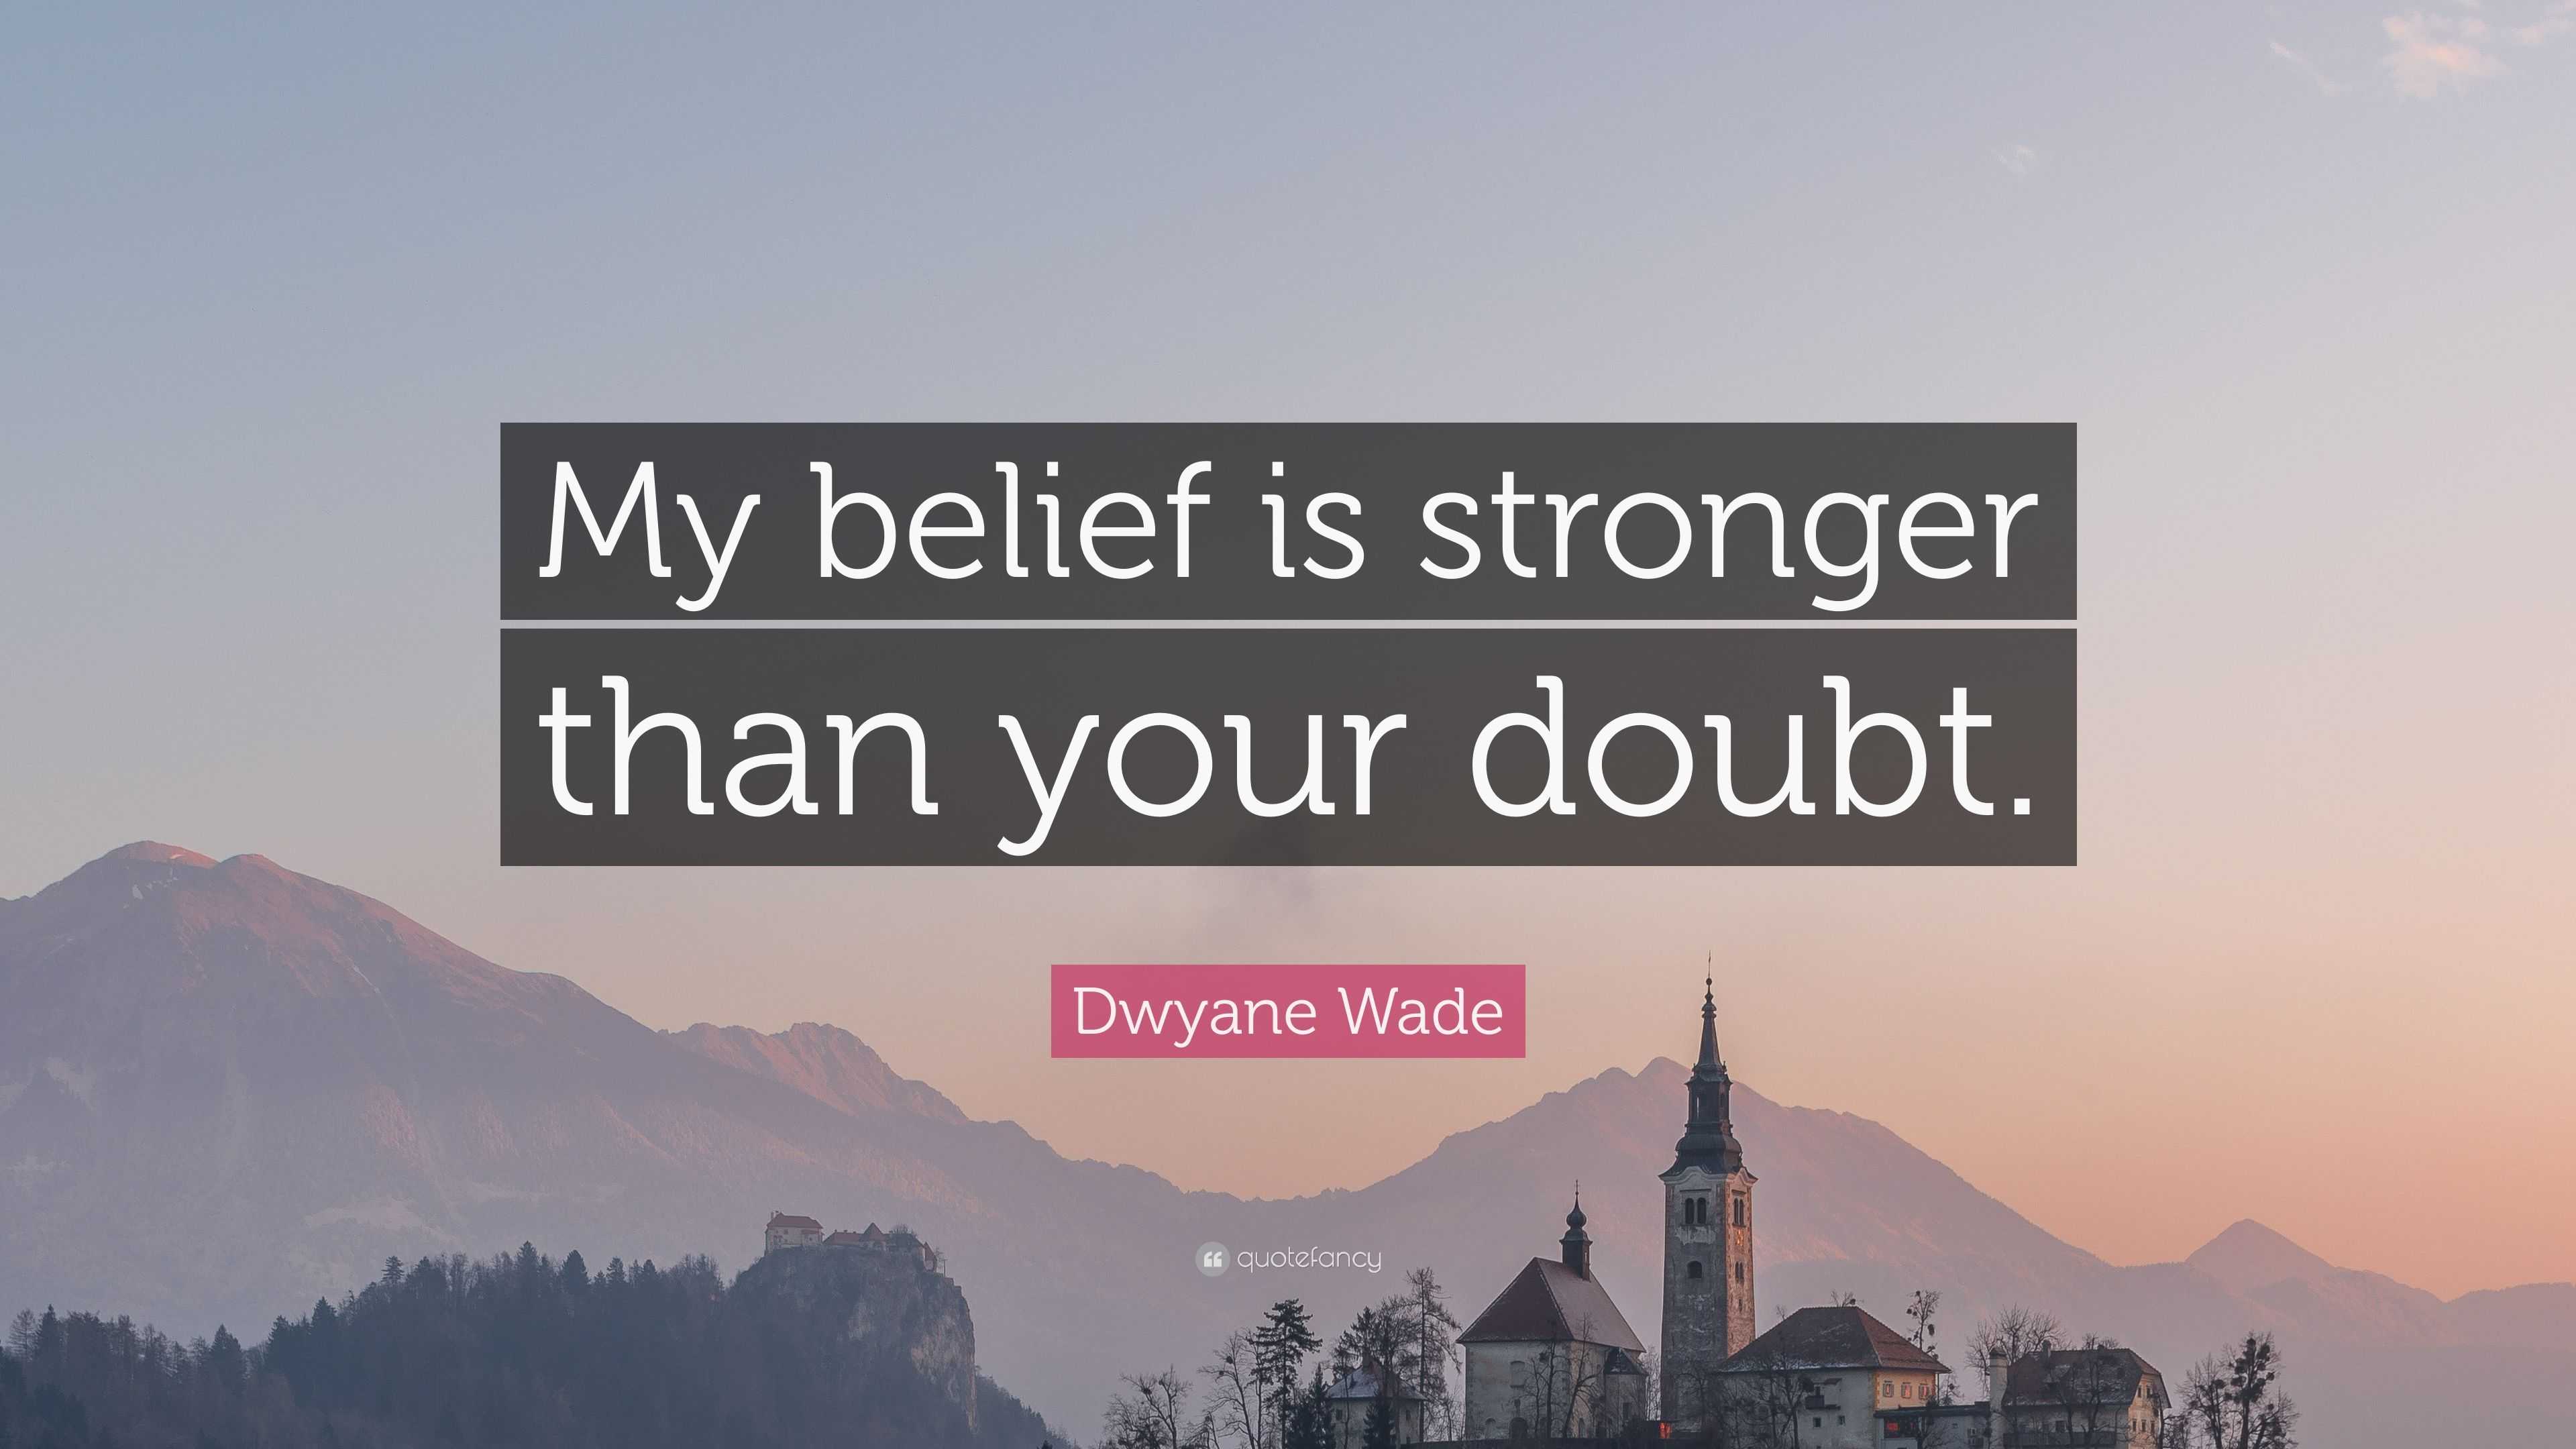 Dwyane Wade Quote: “My belief is stronger than your doubt.”